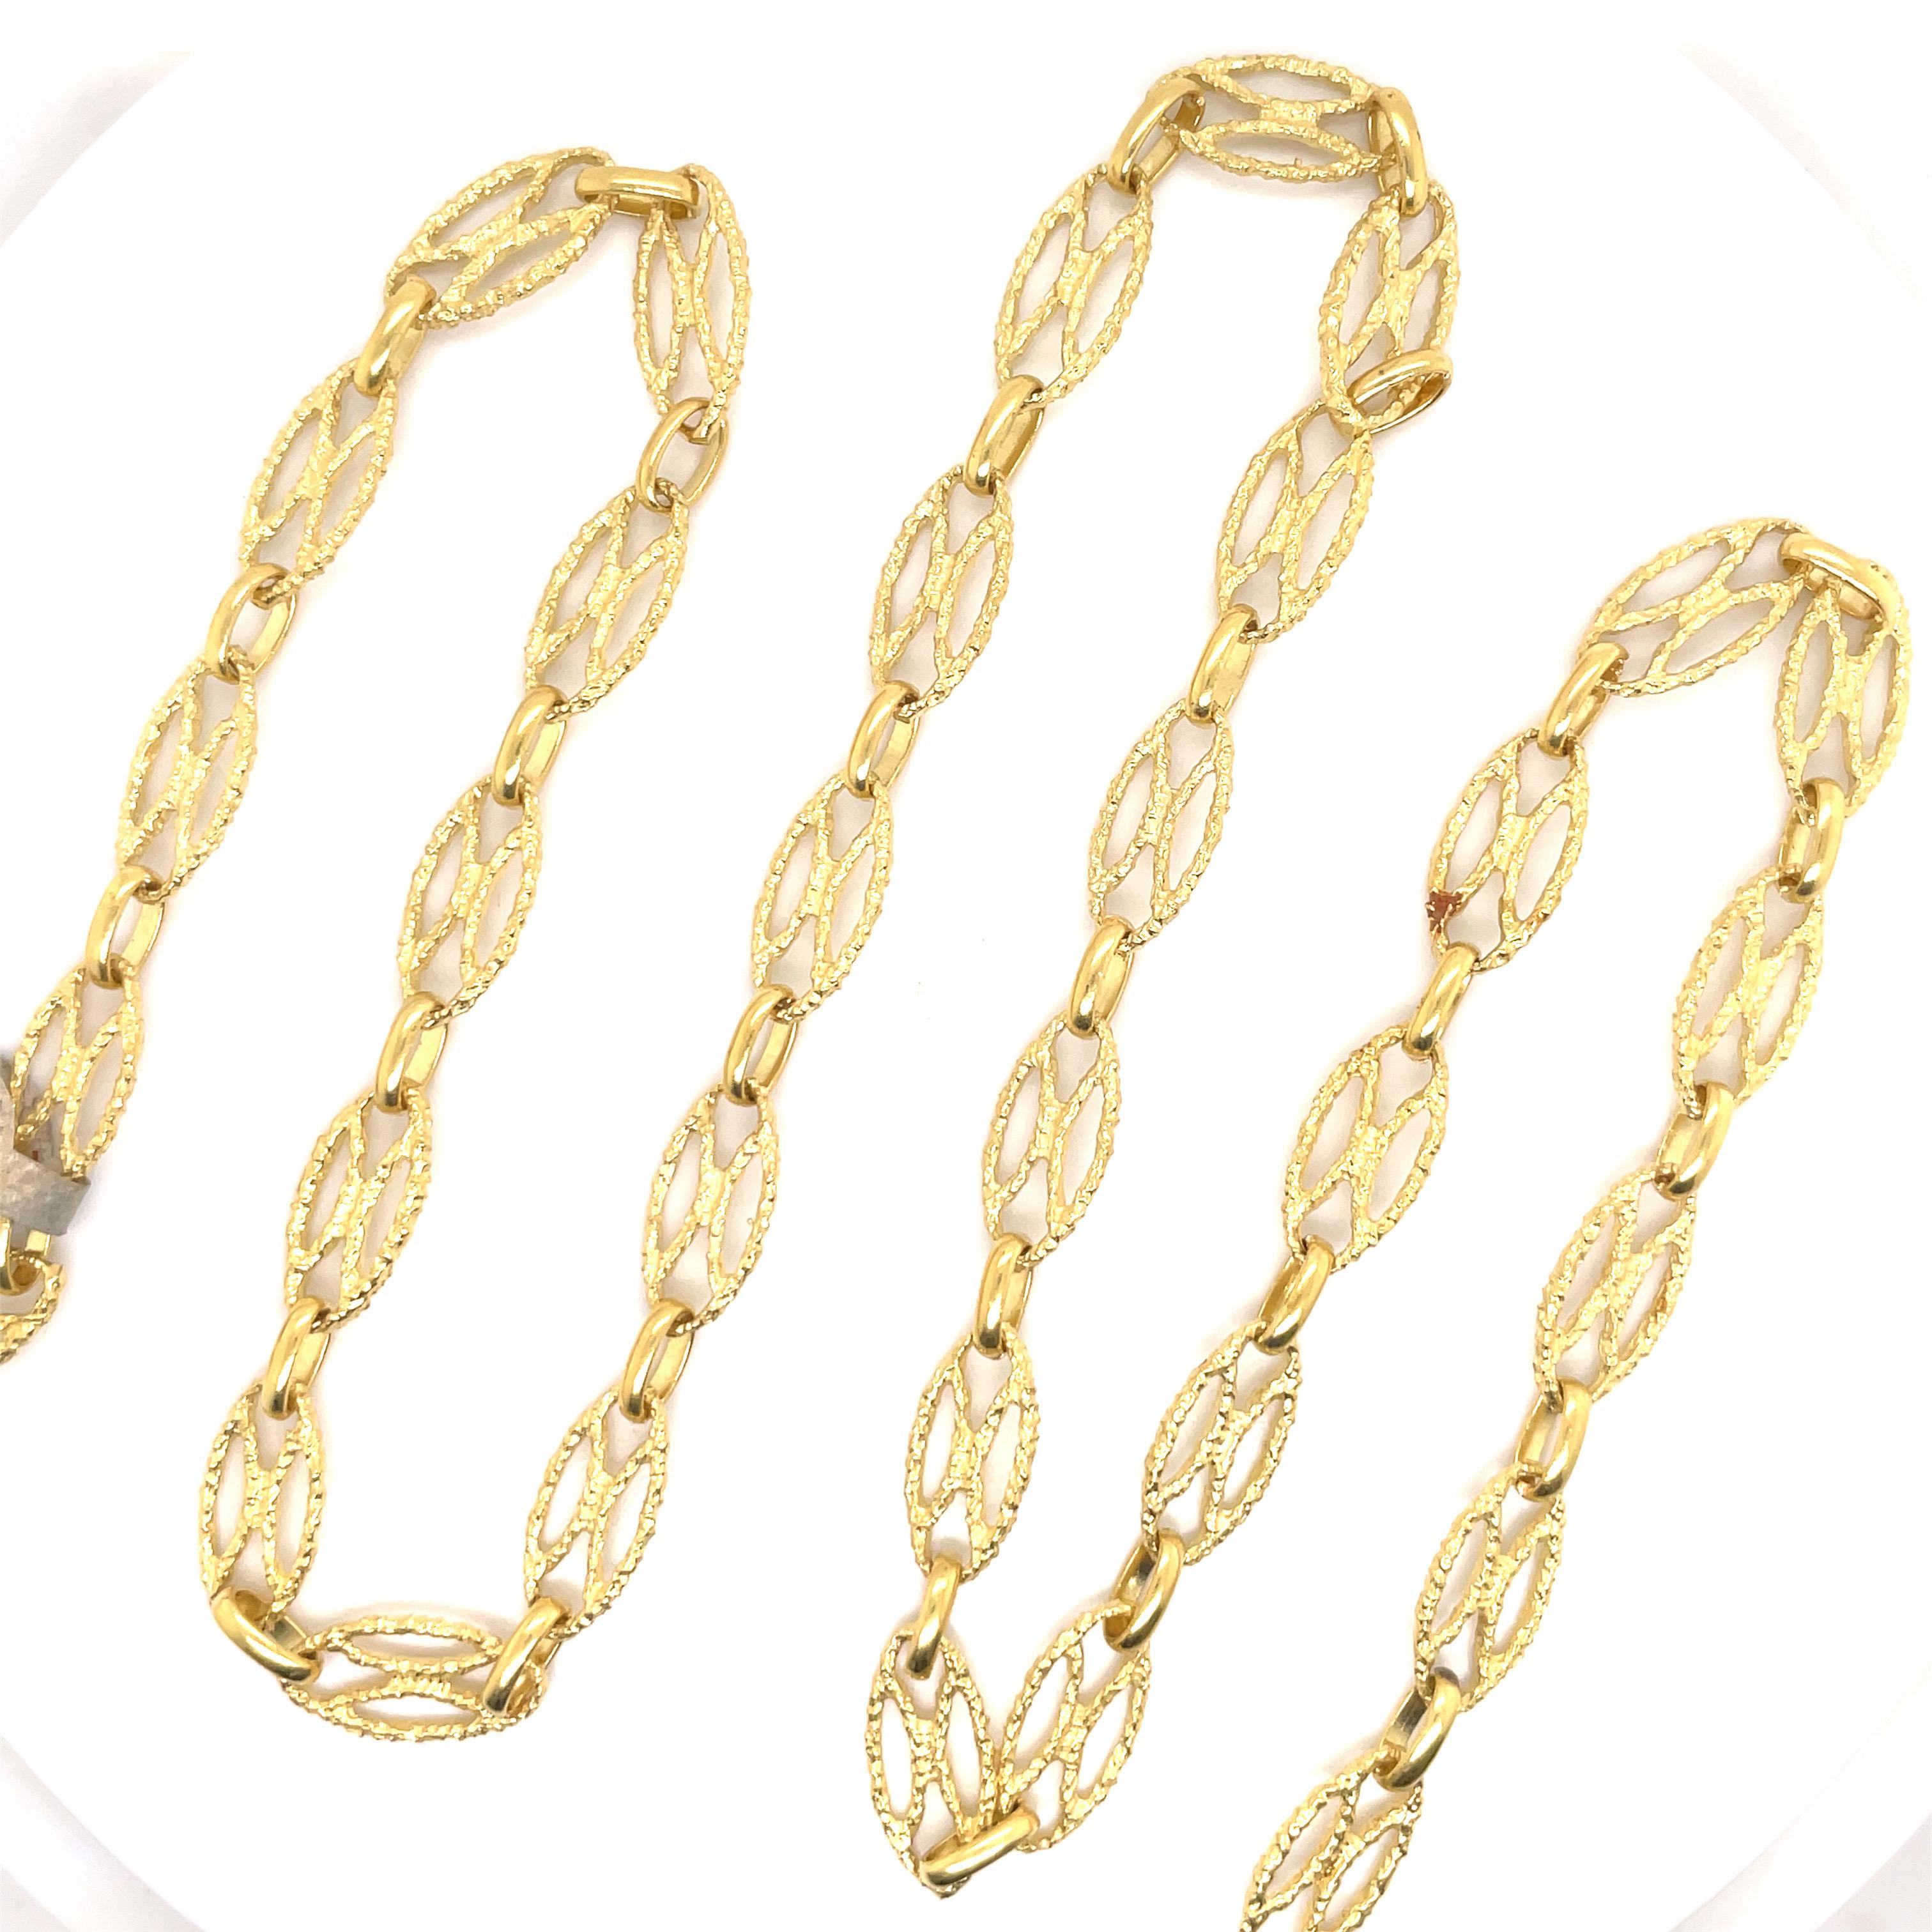 18 Karat Yellow Gold necklace featuring 33 oval openwork links measuring 27.4 inches, 42 grams.
Italian Hallmark. 
Great for layering!